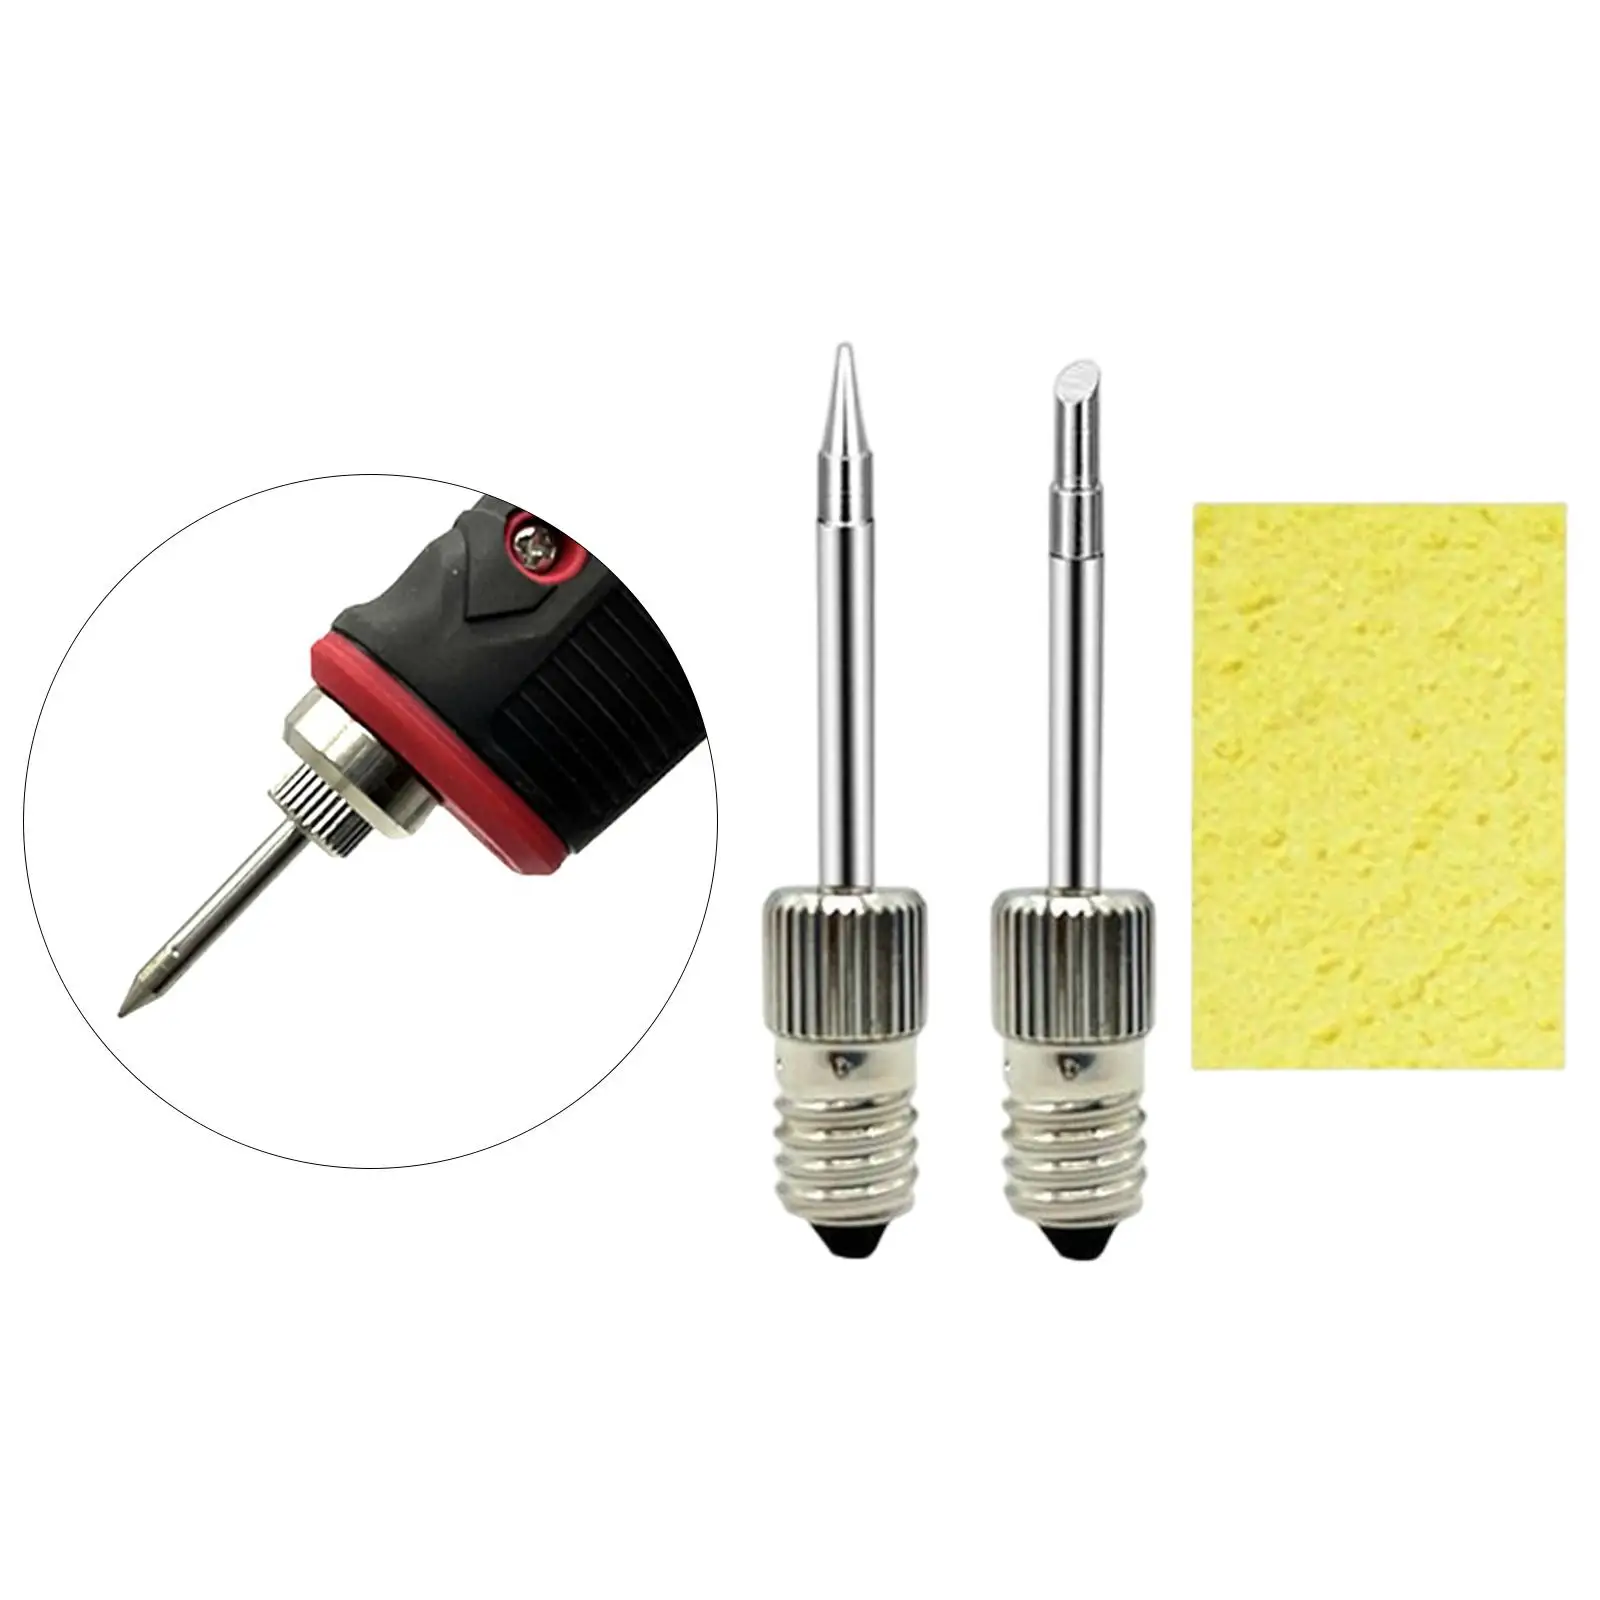 vehiclebusiness Soldering Copper Tips Replacement Soldering Iron Soldering Tips